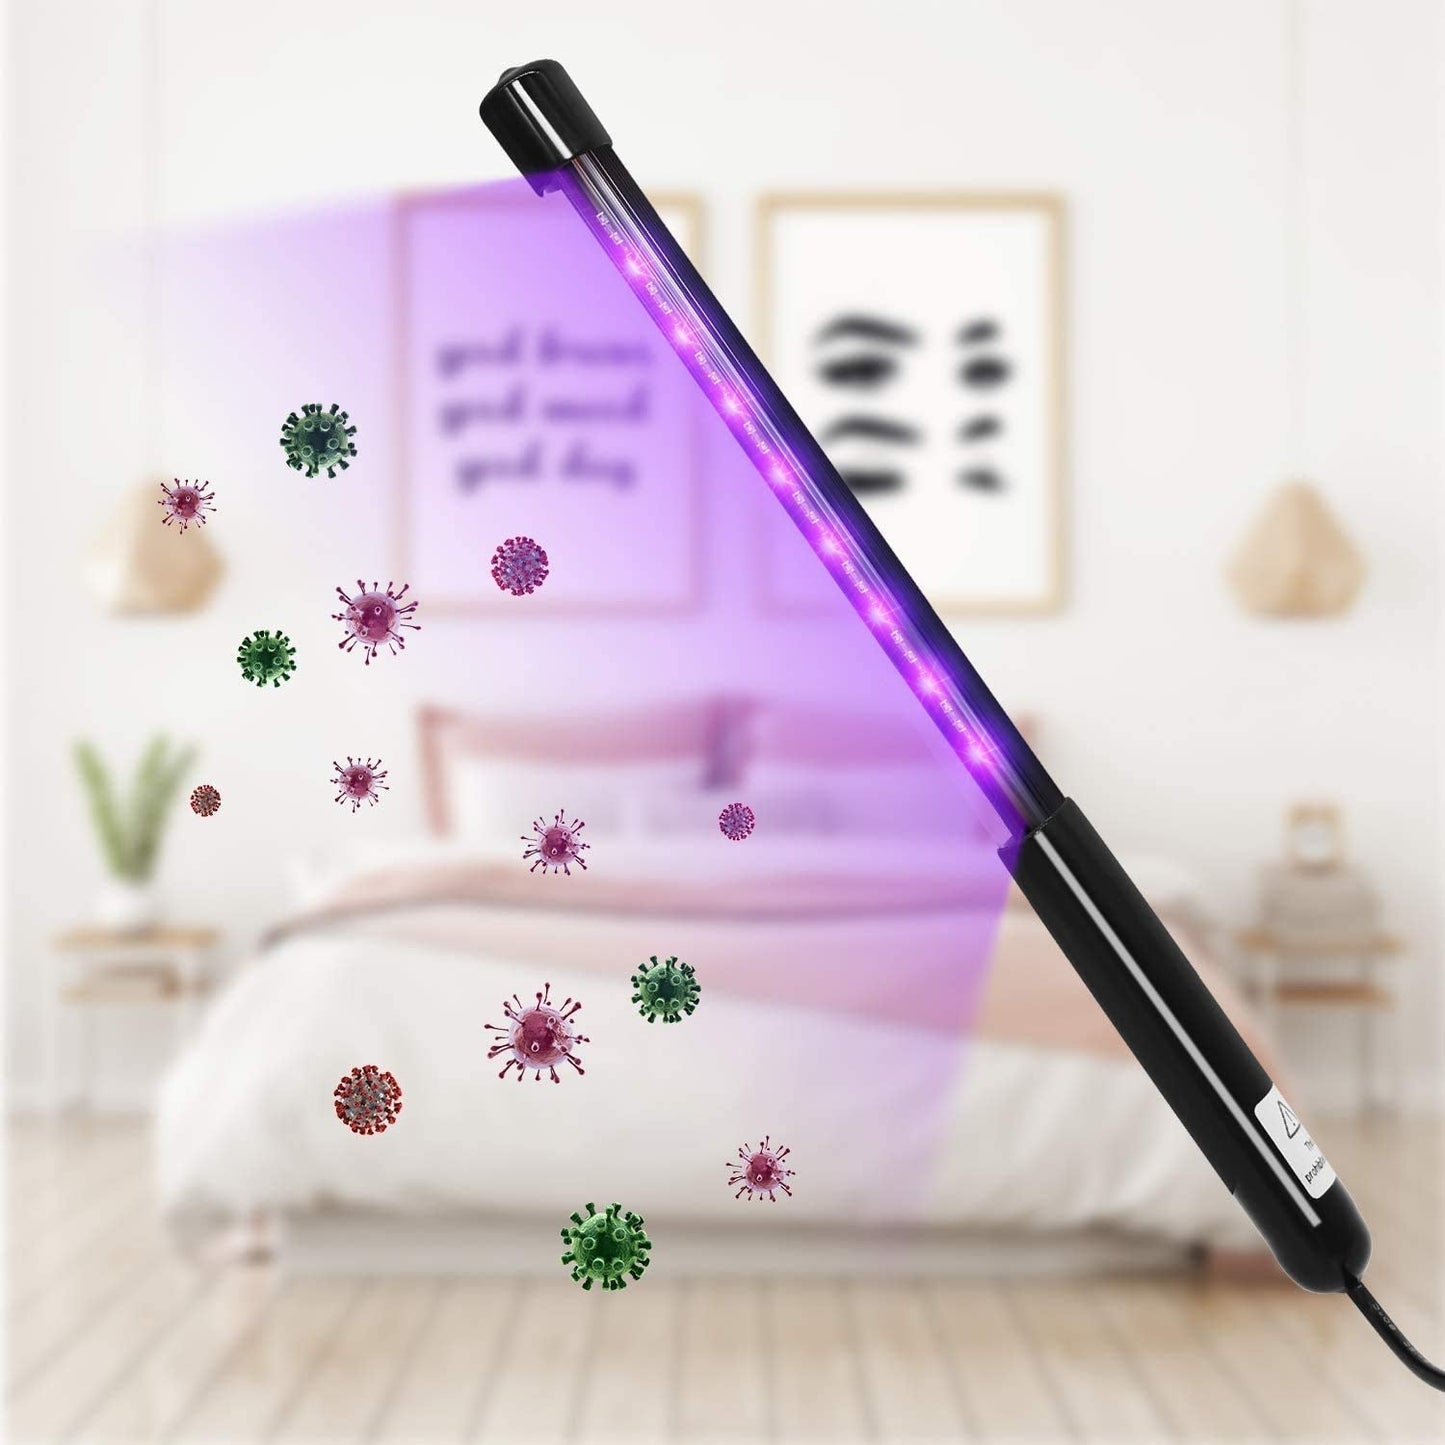 PurpleTek Portable USB Powered UV Light Sanitizer Wand (Powered Through USB ONLY) - Home Decor Gifts and More